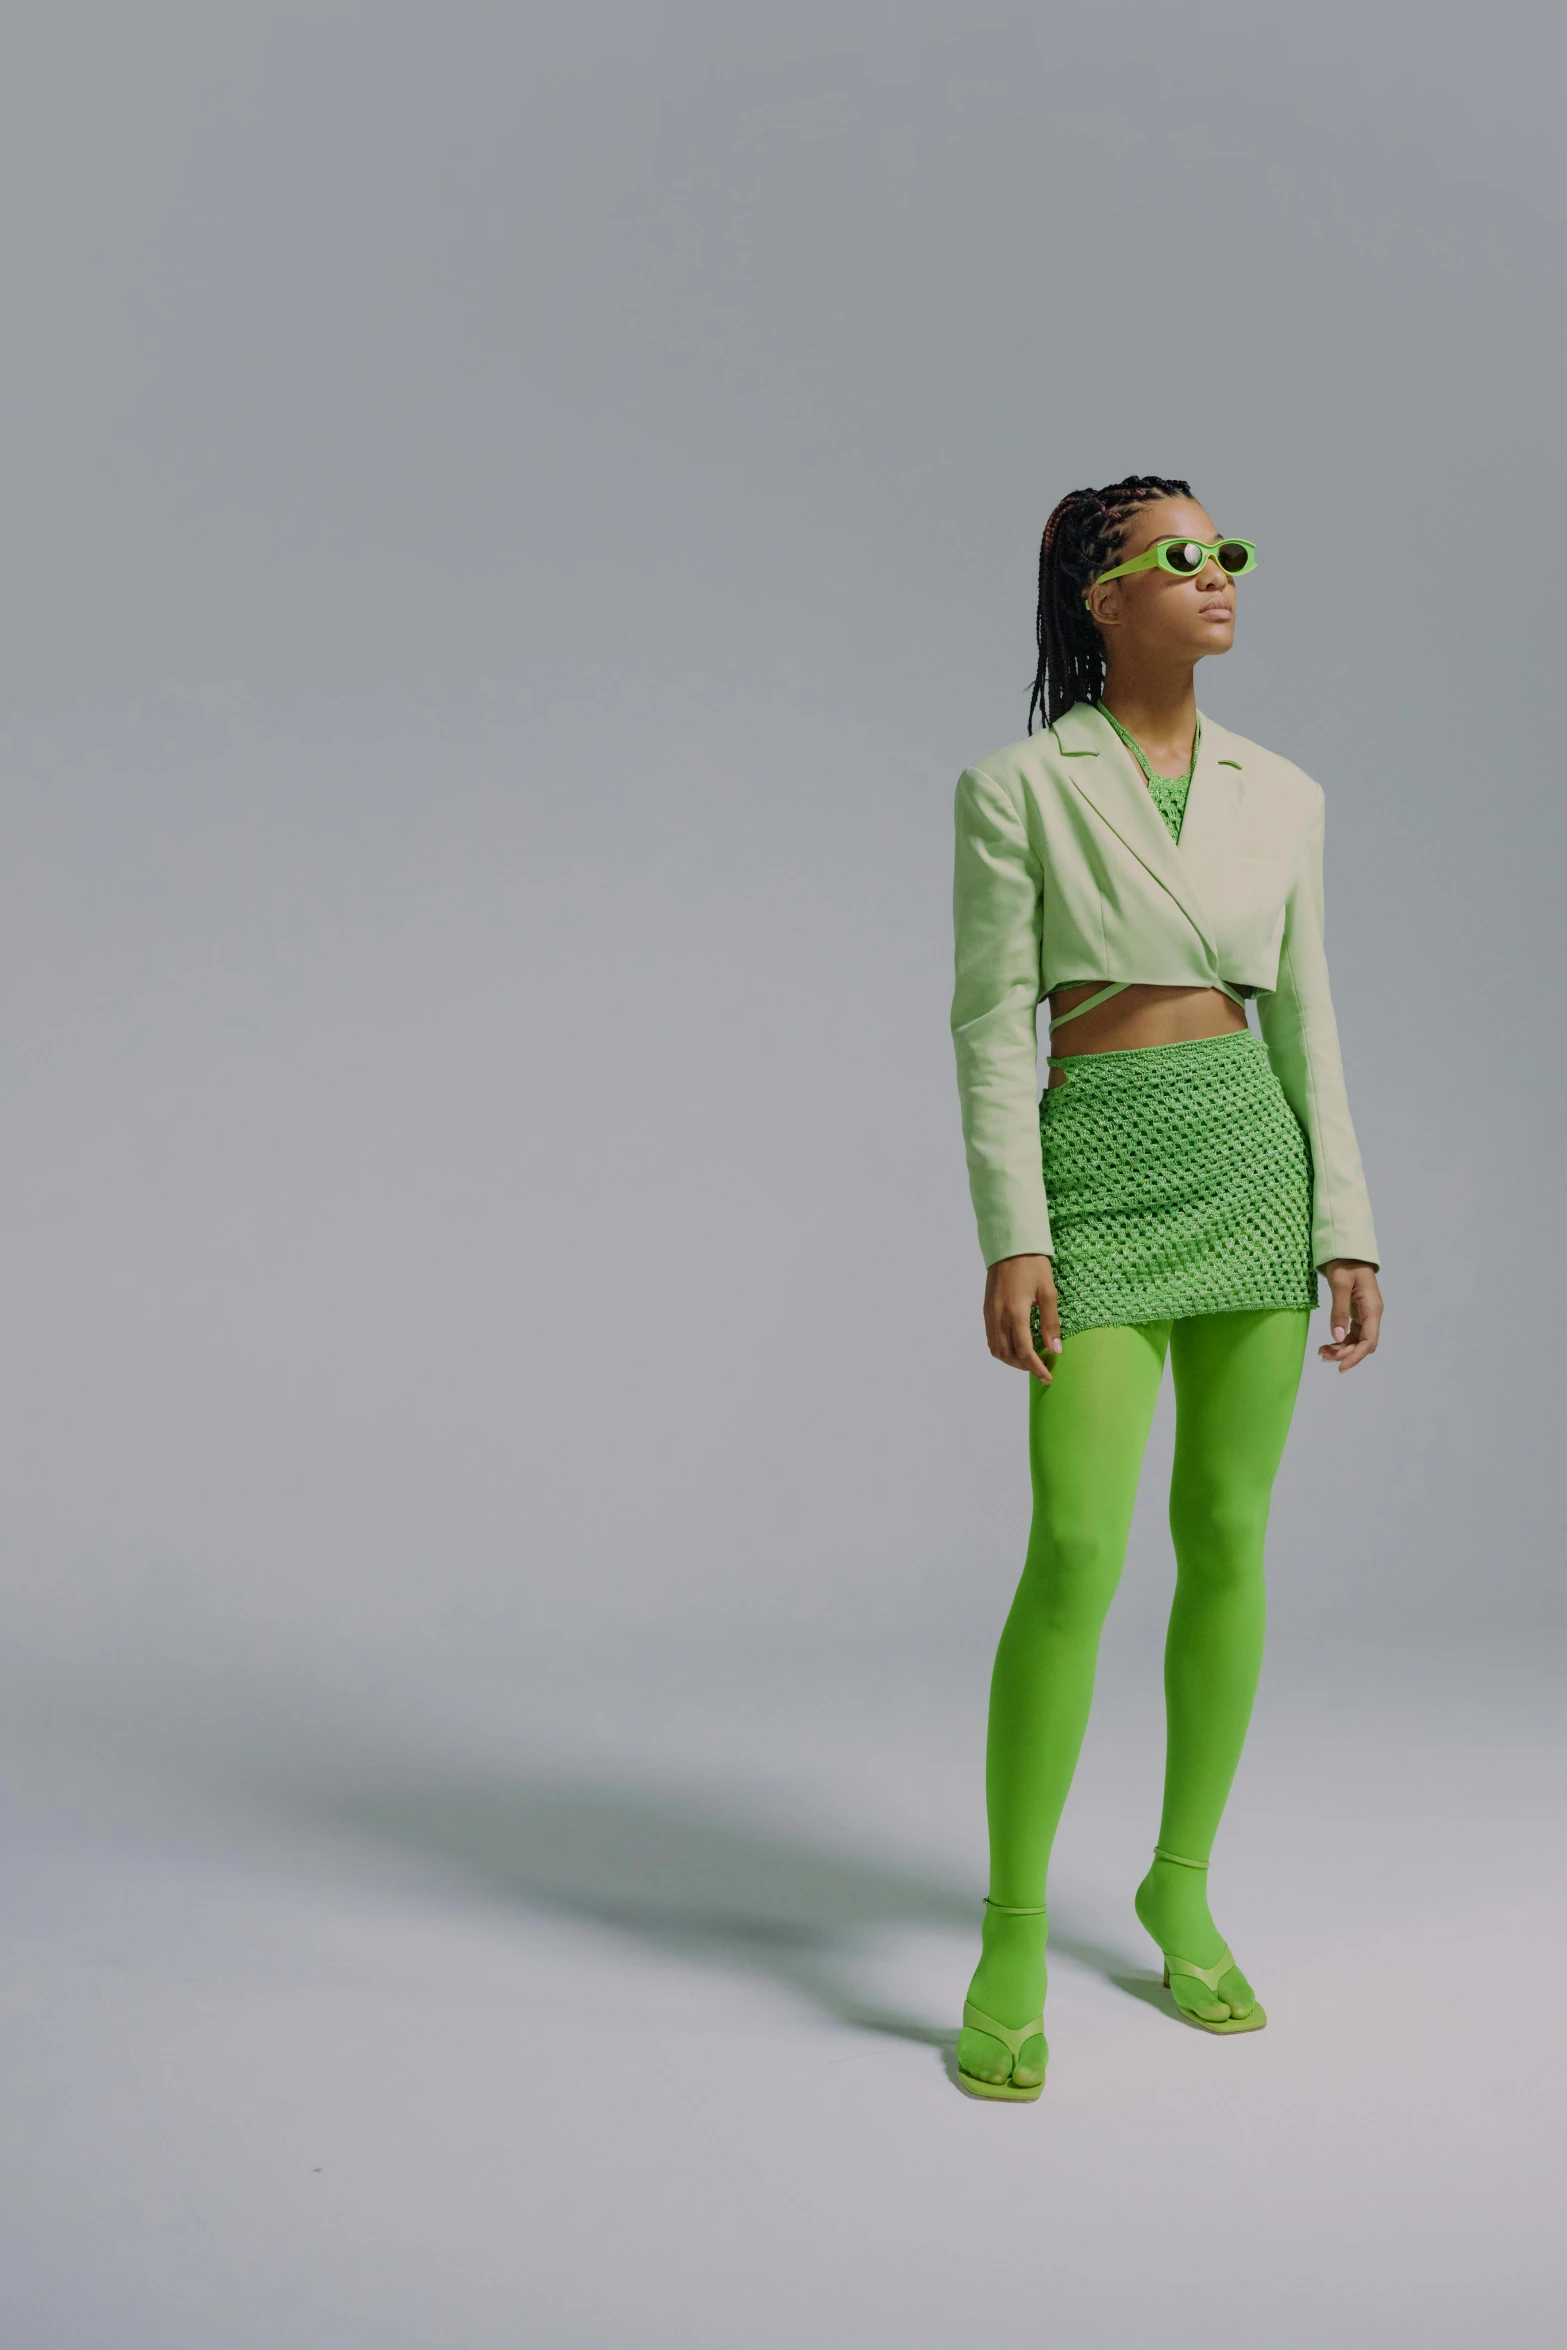 a woman in green tights and a white shirt, wearing shades, off - white collection, ((neon colors)), slide show